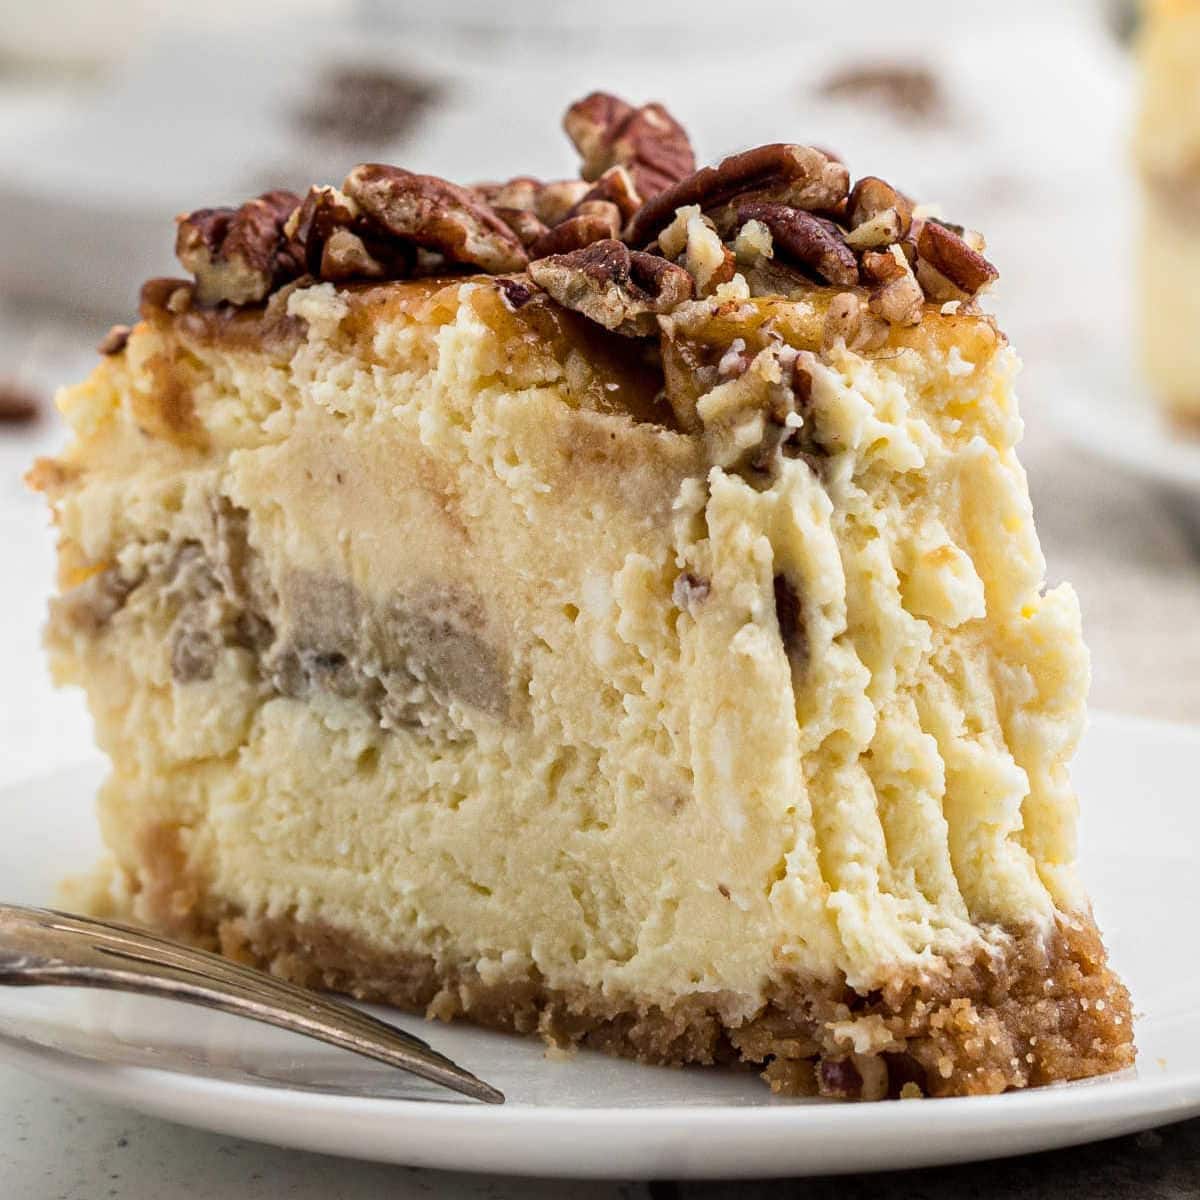 A closeup of a slice of southern banana pudding cheesecake showing the creamy texture.